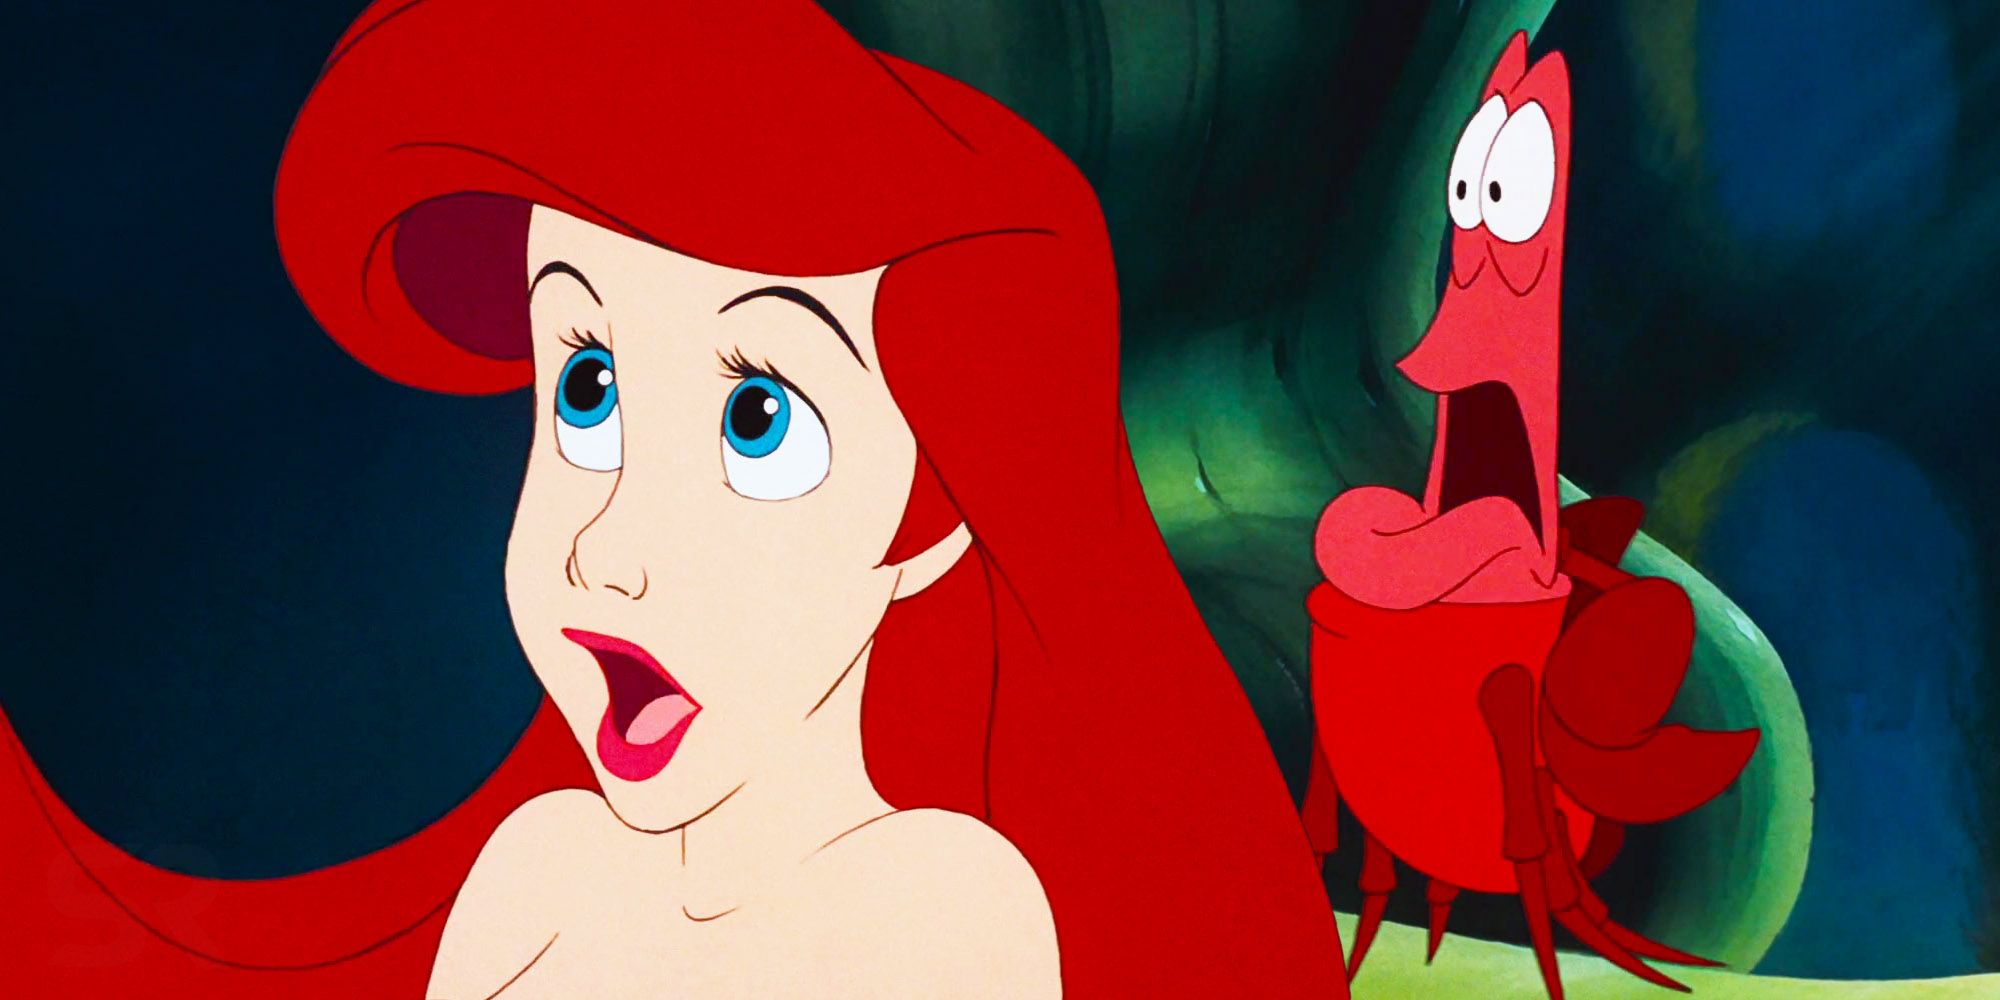 How Old The Little Mermaid's Ariel Is In Disney's Animated Movie